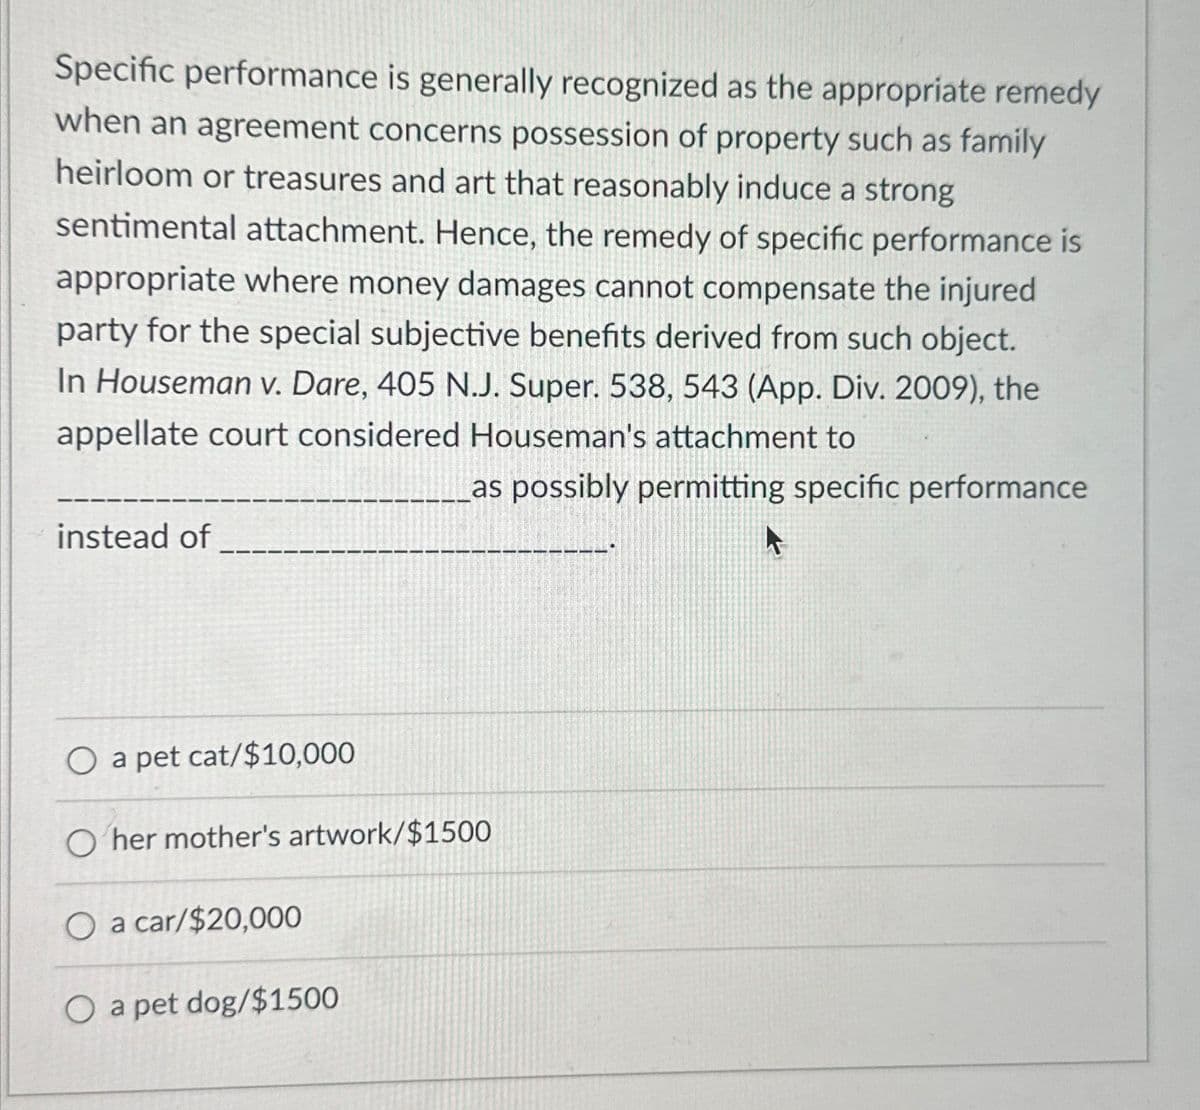 Specific performance is generally recognized as the appropriate remedy
when an agreement concerns possession of property such as family
heirloom or treasures and art that reasonably induce a strong
sentimental attachment. Hence, the remedy of specific performance is
appropriate where money damages cannot compensate the injured
party for the special subjective benefits derived from such object.
In Houseman v. Dare, 405 N.J. Super. 538, 543 (App. Div. 2009), the
appellate court considered Houseman's attachment to
as possibly permitting specific performance
instead of
O a pet cat/$10,000
O her mother's artwork/$1500
O a car/$20,000
O a pet dog/$1500